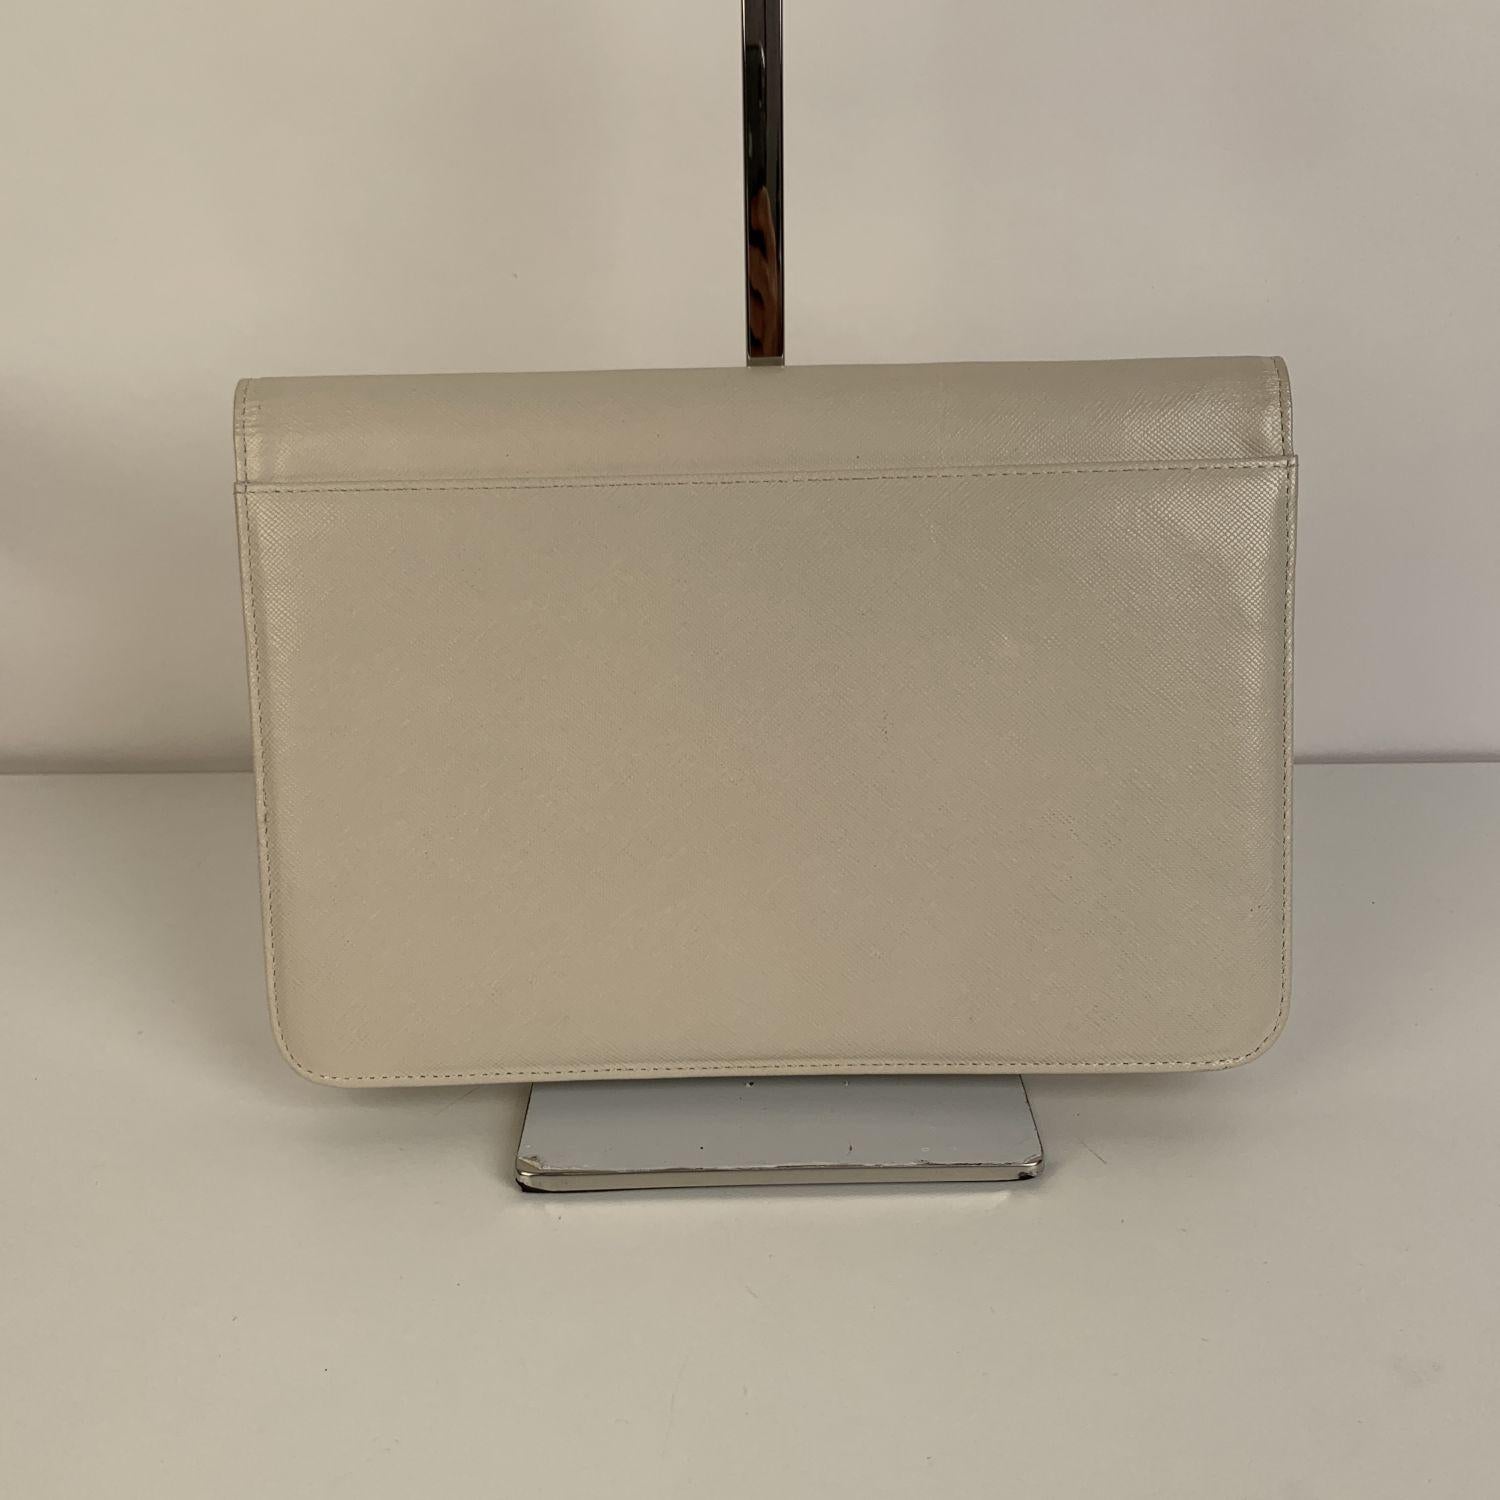 Yves Saint Laurent Vintage White Leather Clutch Bag In Excellent Condition In Rome, Rome